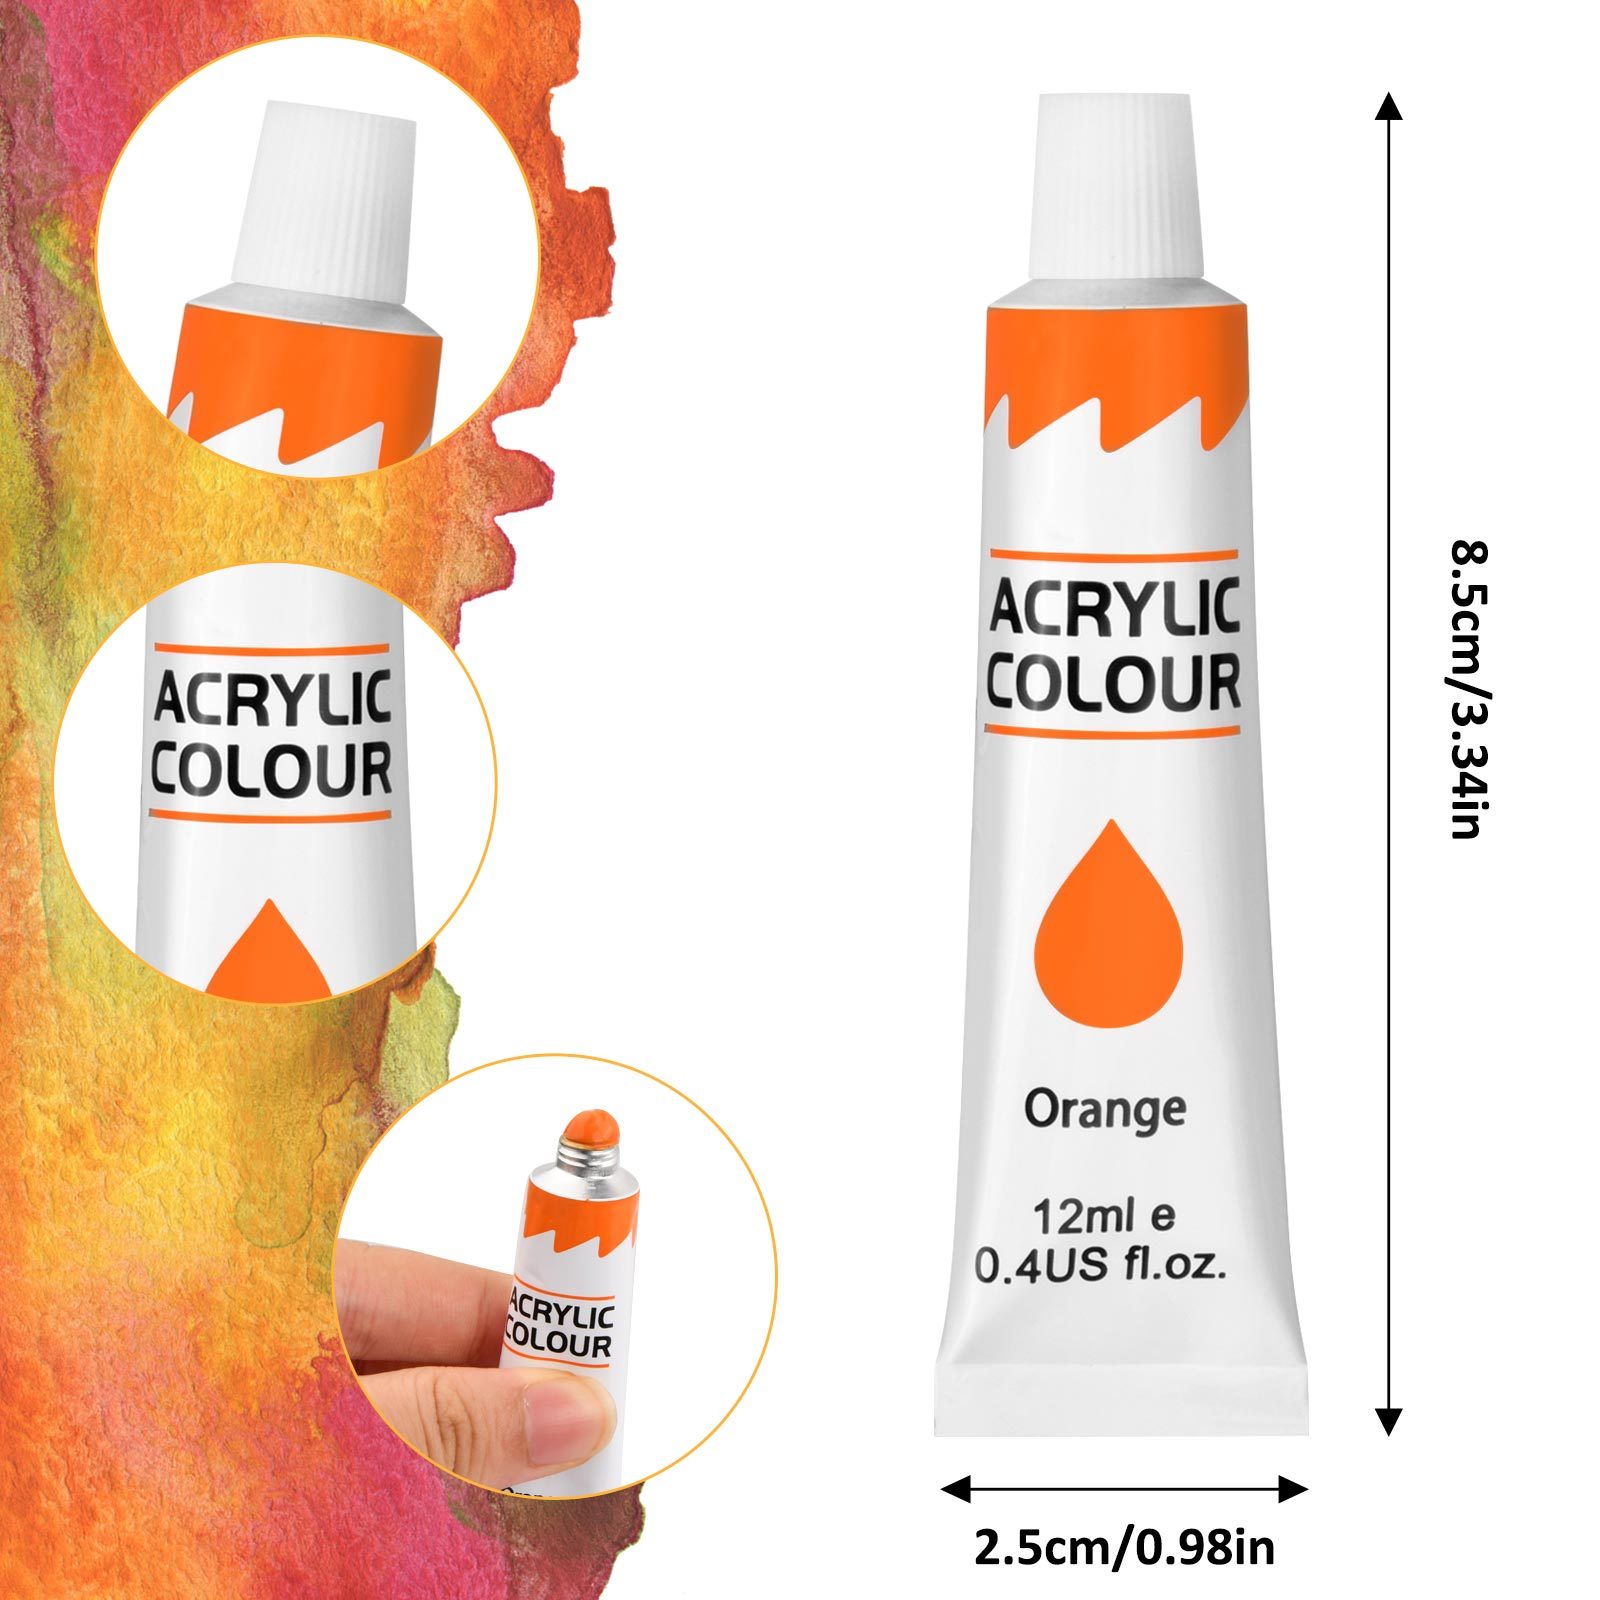 Crafts 4 All Acrylic Paint Set - 24-Pack of 12mL Art Paints for Canvas,  Painting Decorations, Wood, Ceramics and Fabrics - Craft Painting Supplies  for